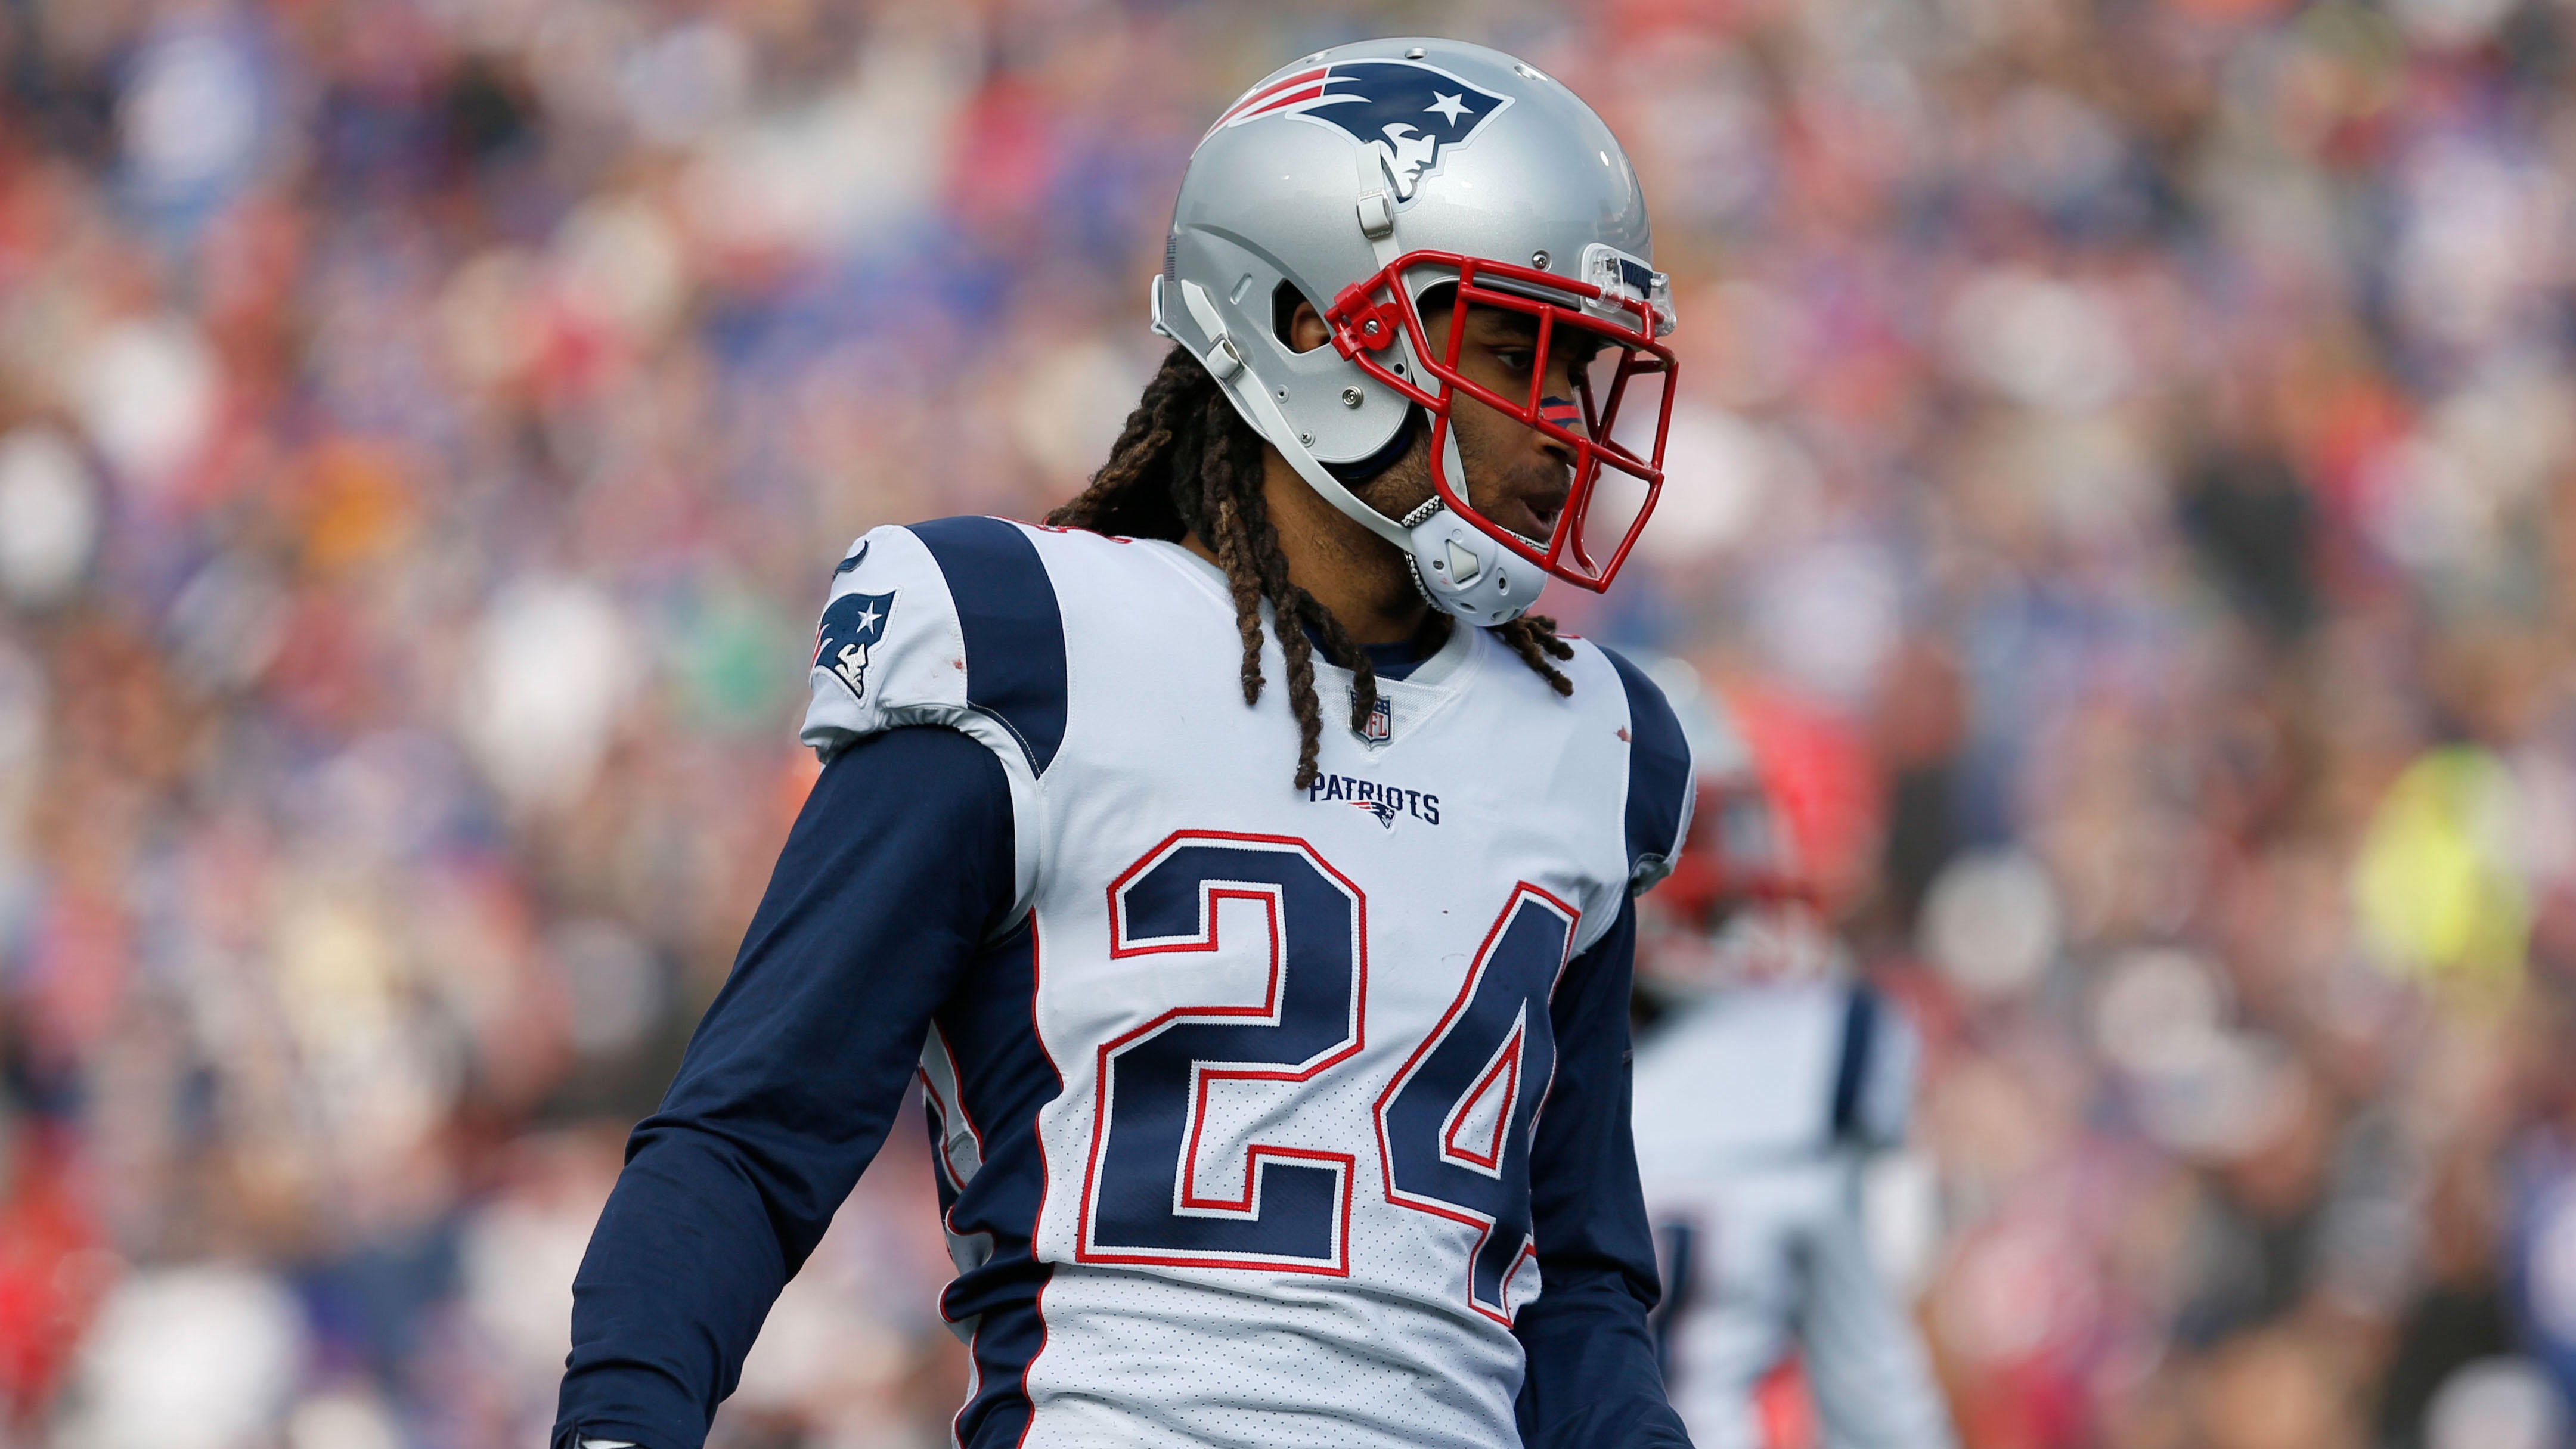 stephon gilmore 4 - Re-Ranking the Top 10 Players on the NFL Top 100 List